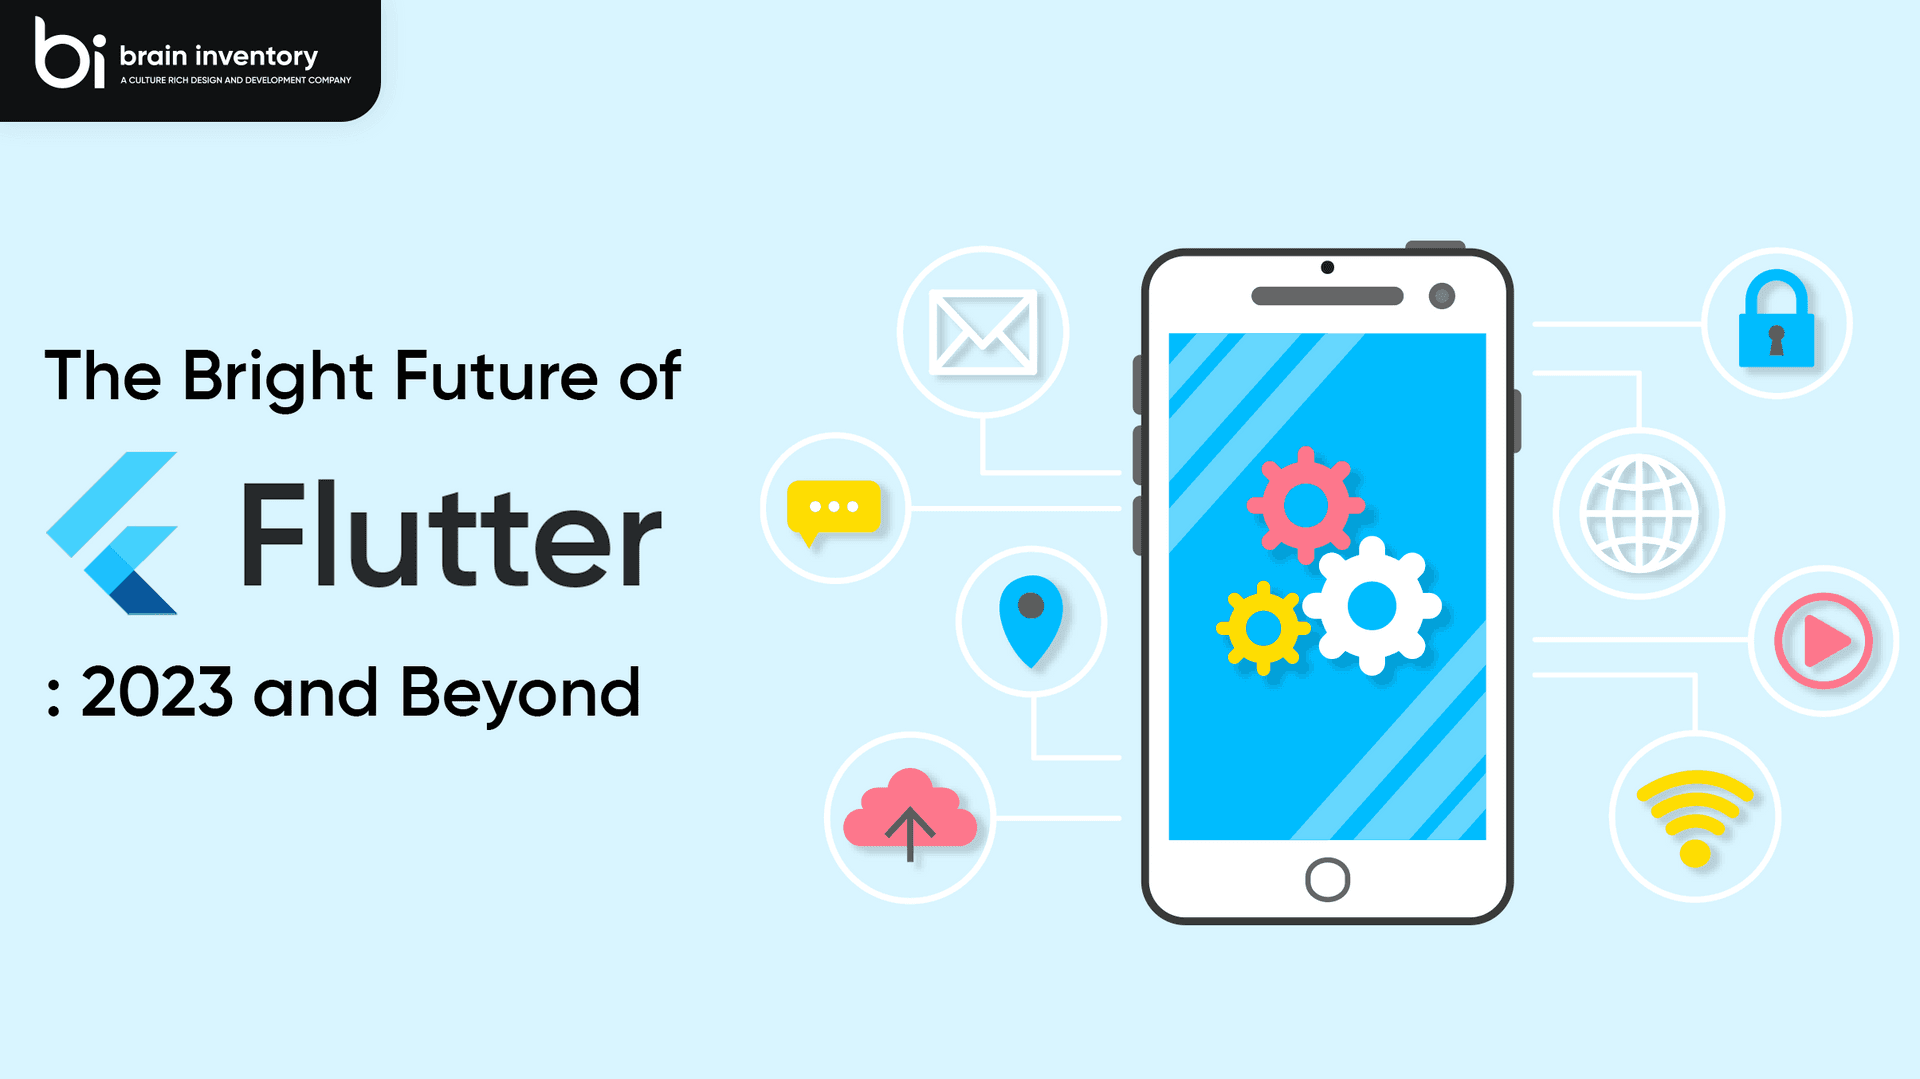 The Bright Future of Flutter: 2023 and Beyond